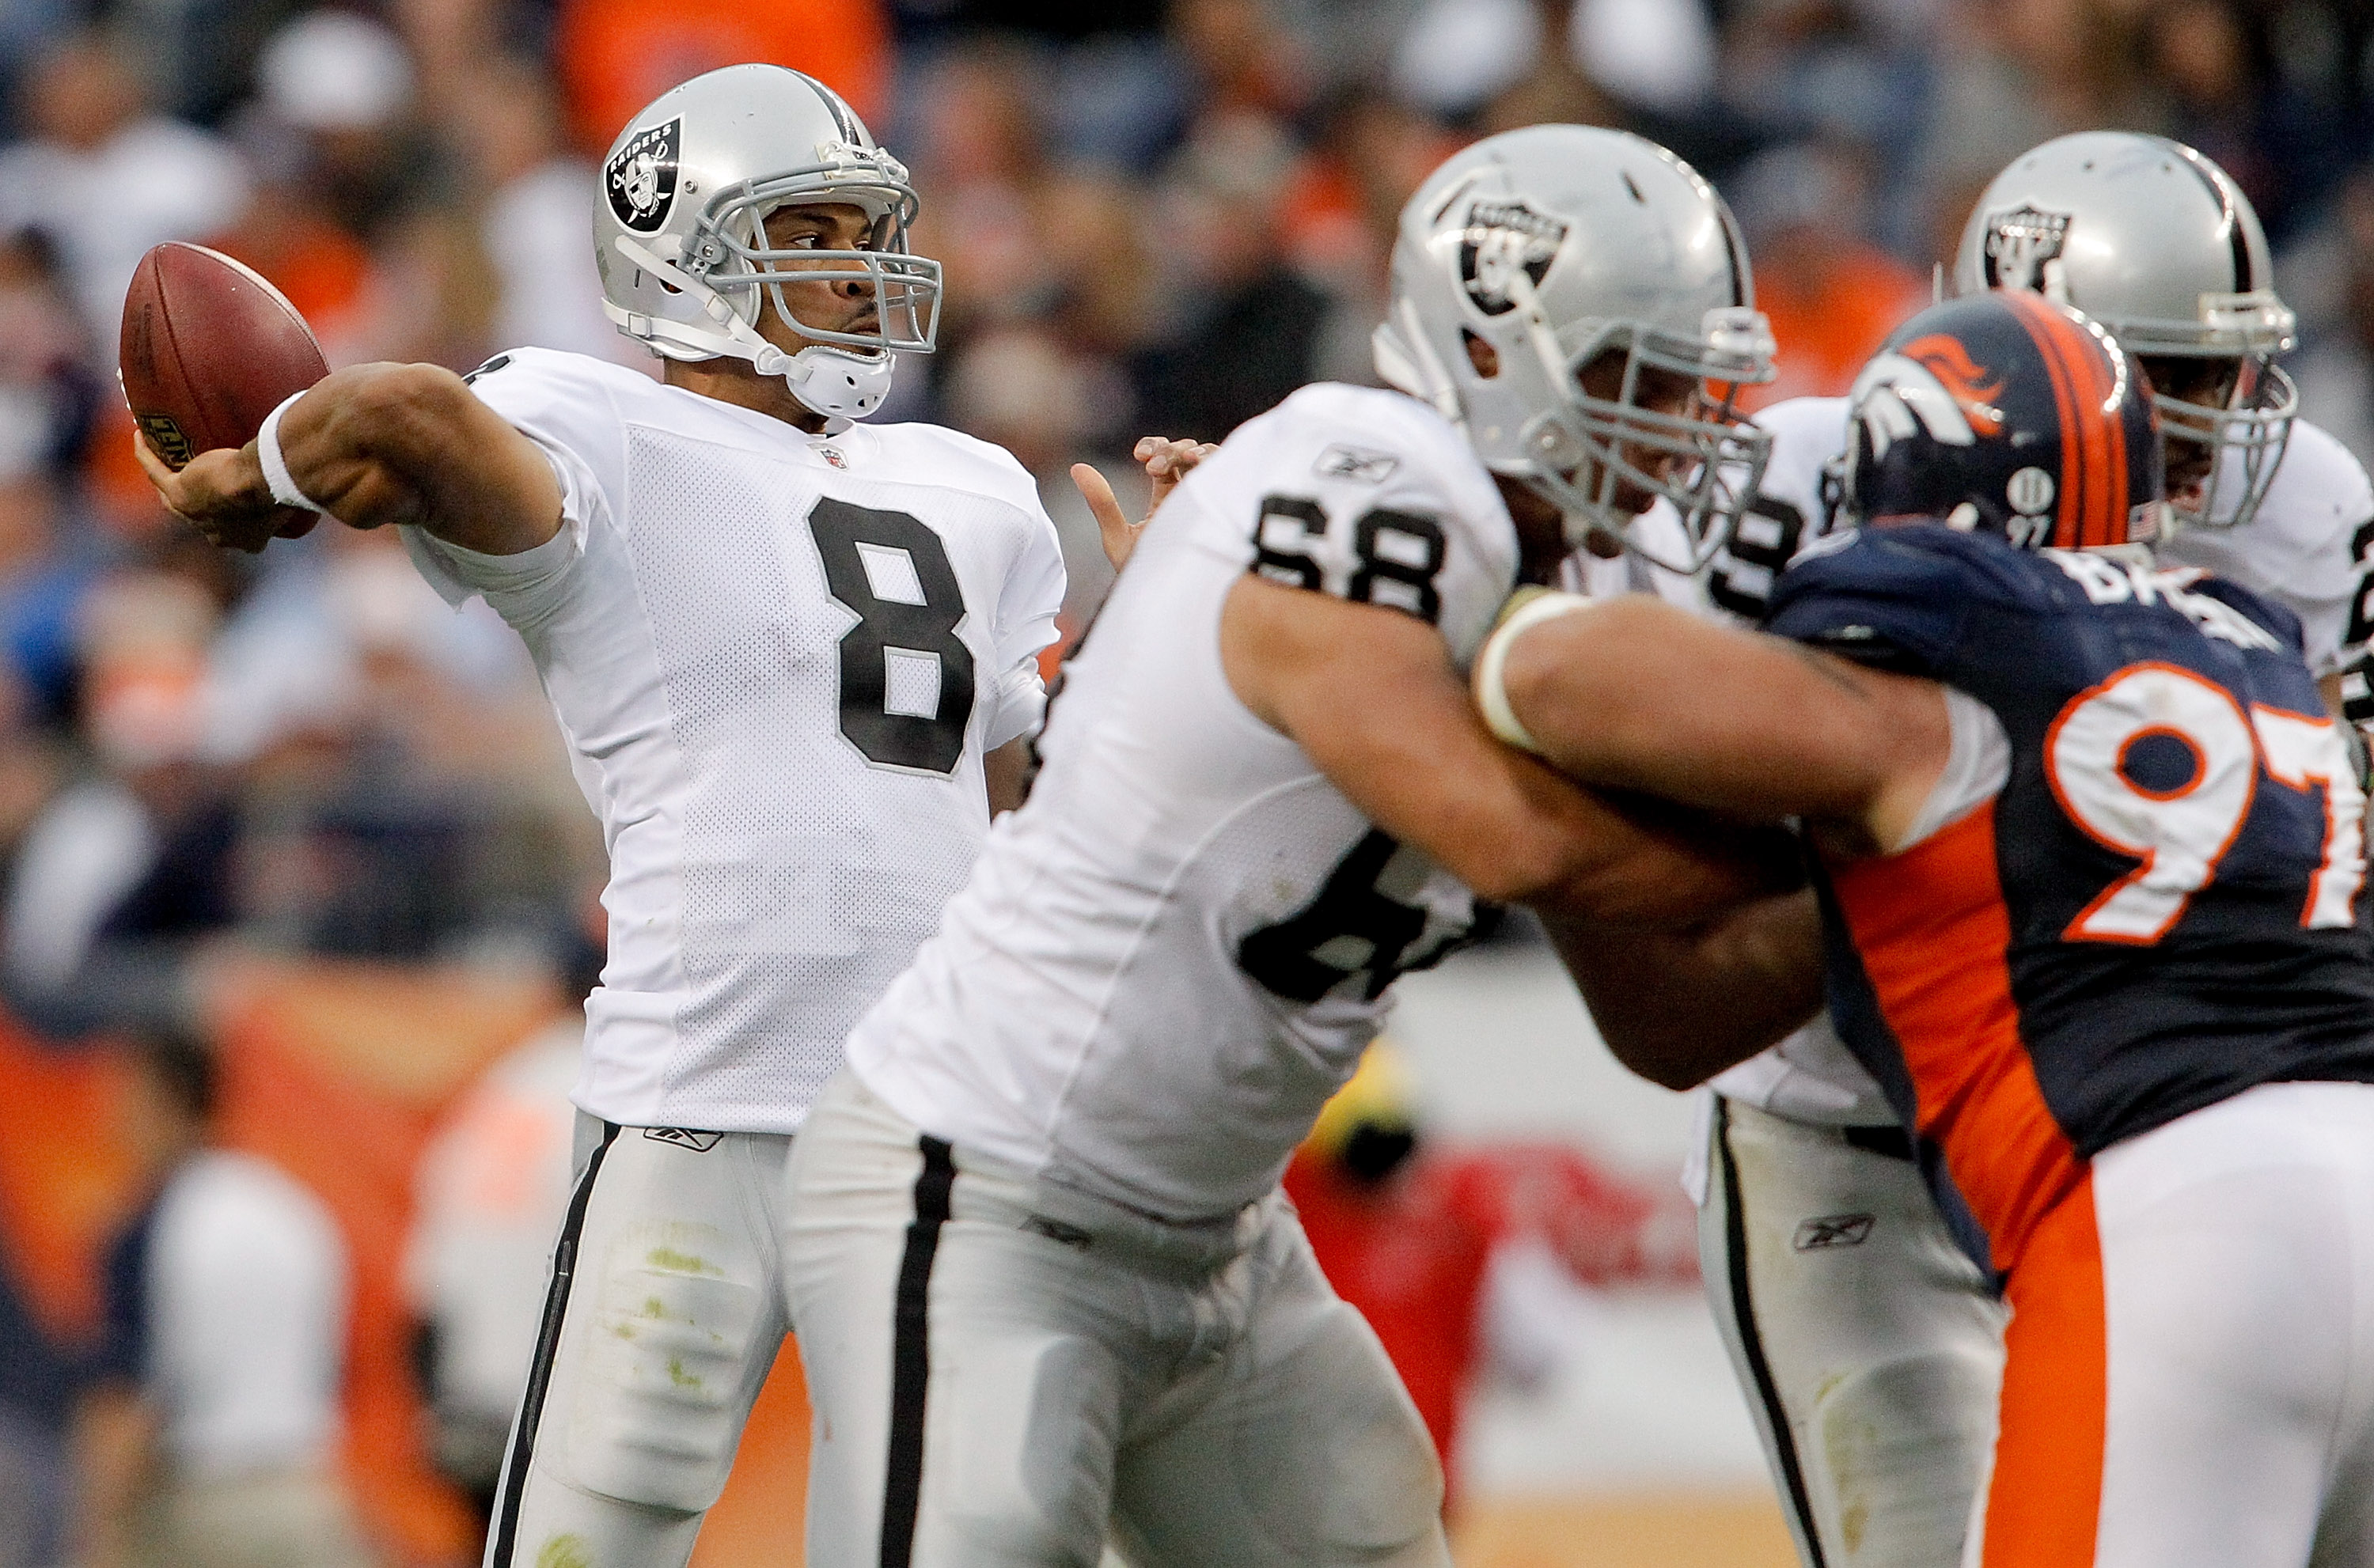 DENVER - OCTOBER 24:  Quarterback Jason Campbell #8 of the Oakland Raiders makes a pass against the Denver Broncos in the third quarter at INVESCO Field at Mile High on October 24, 2010 in Denver, Colorado. The Raiders defeated the Broncos 59-14. (Photo b